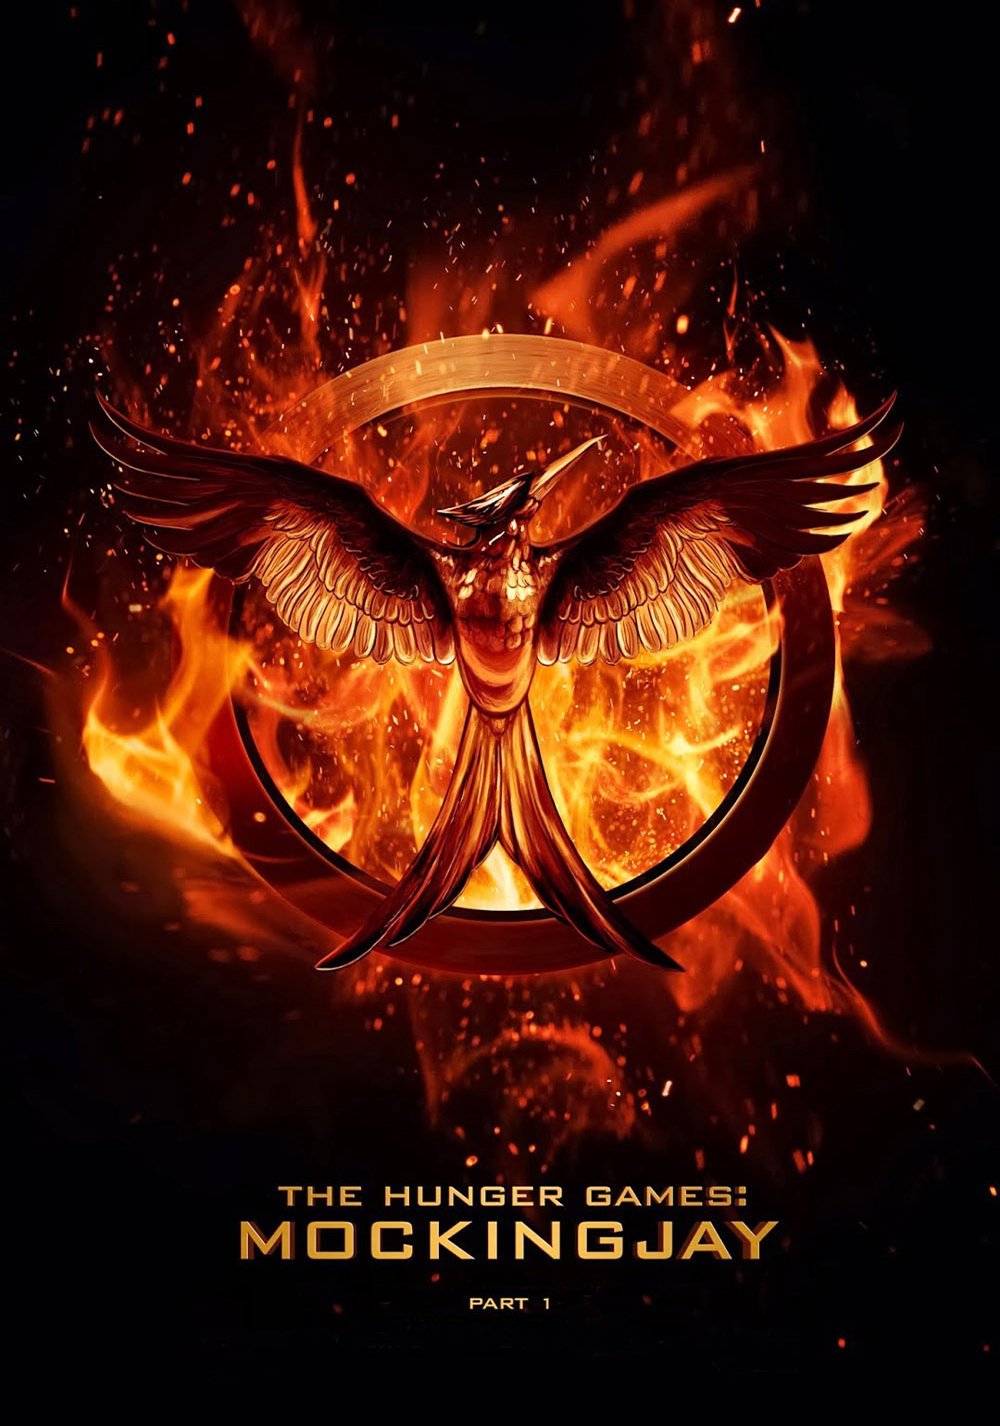 The Hunger Games Mockingjay Part 1 Movie Poster ID 79332 Image